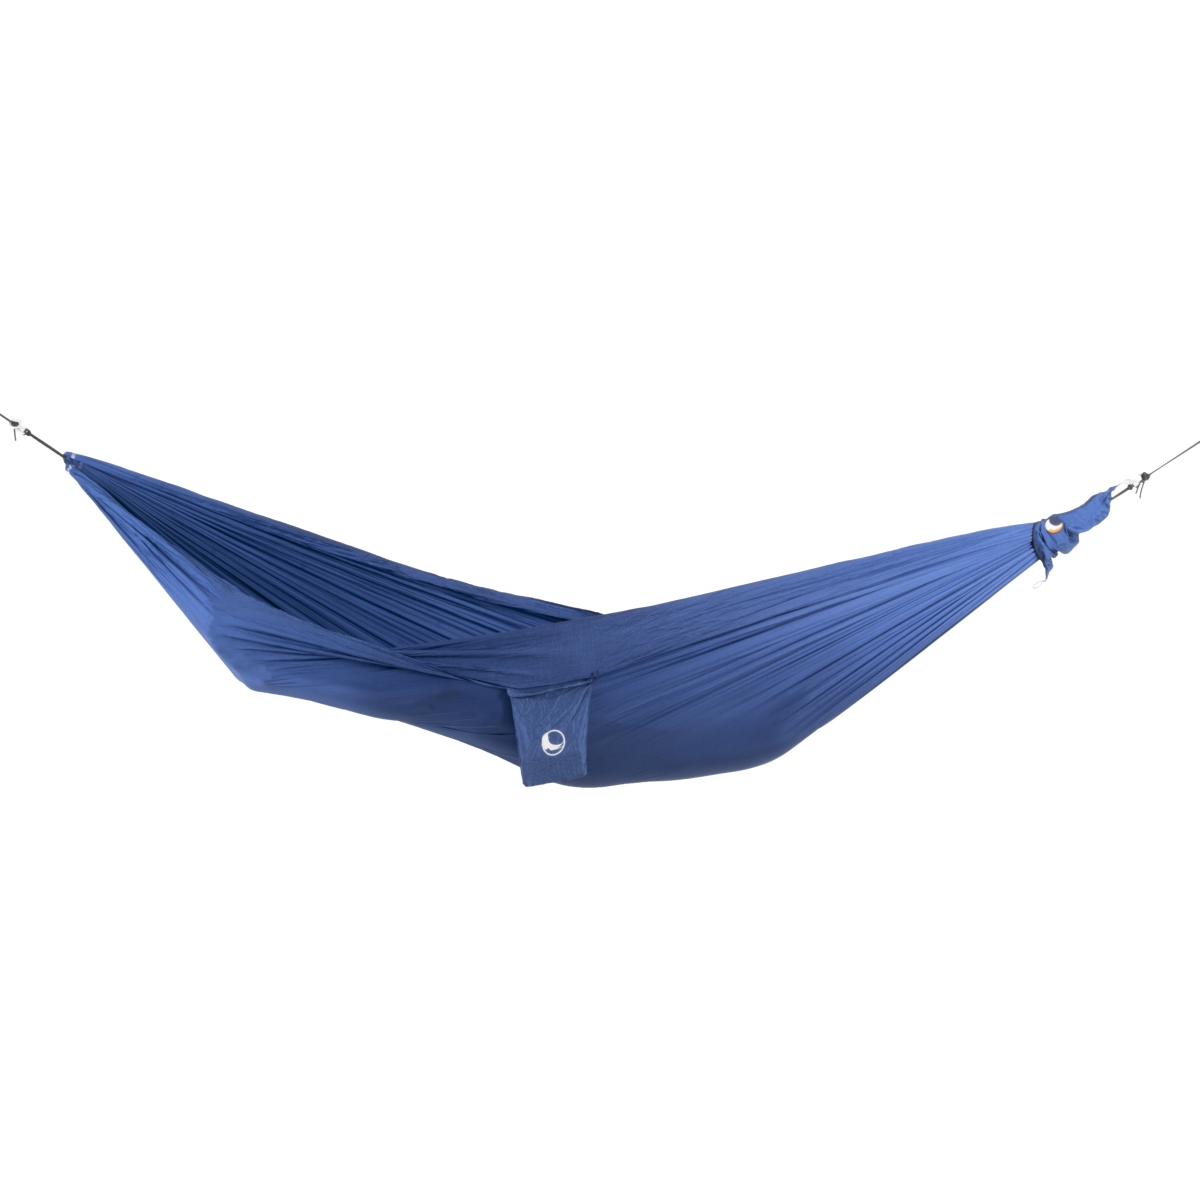 Image of Ticket To The Moon Travel Compact Hammock - Royal Blue